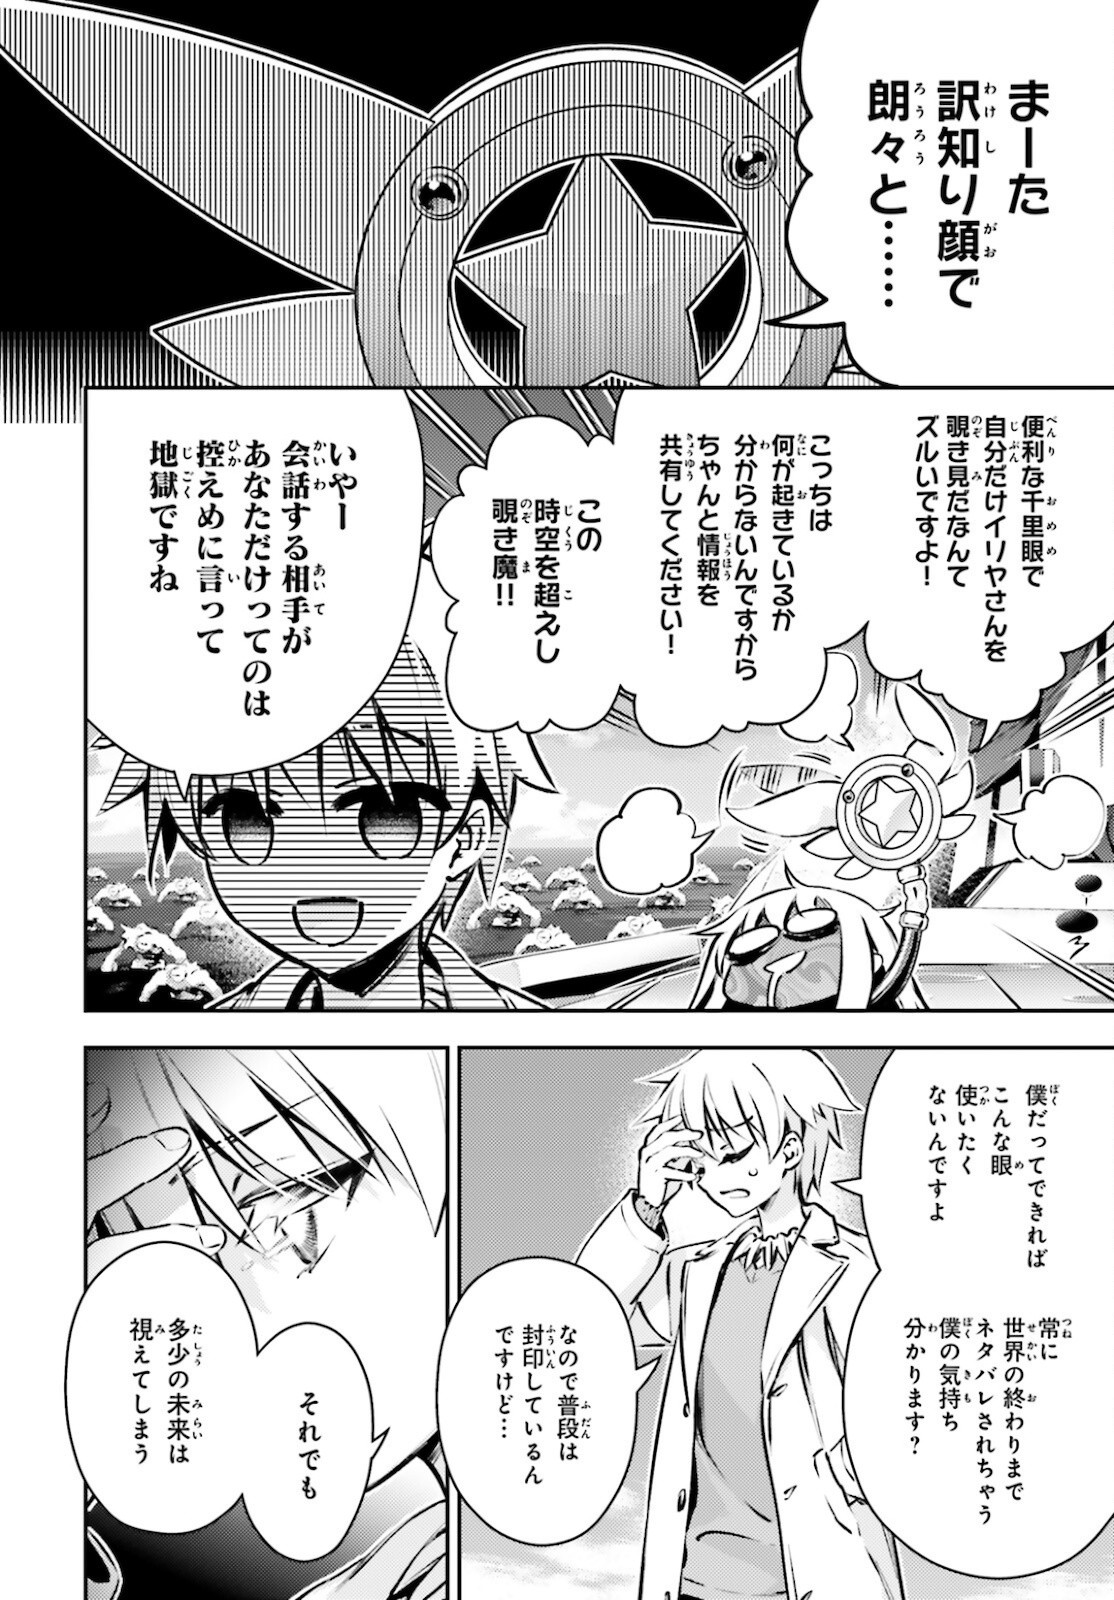 Fate/Kaleid Liner Prisma Illya Drei! - Chapter 66-2 - Page 2